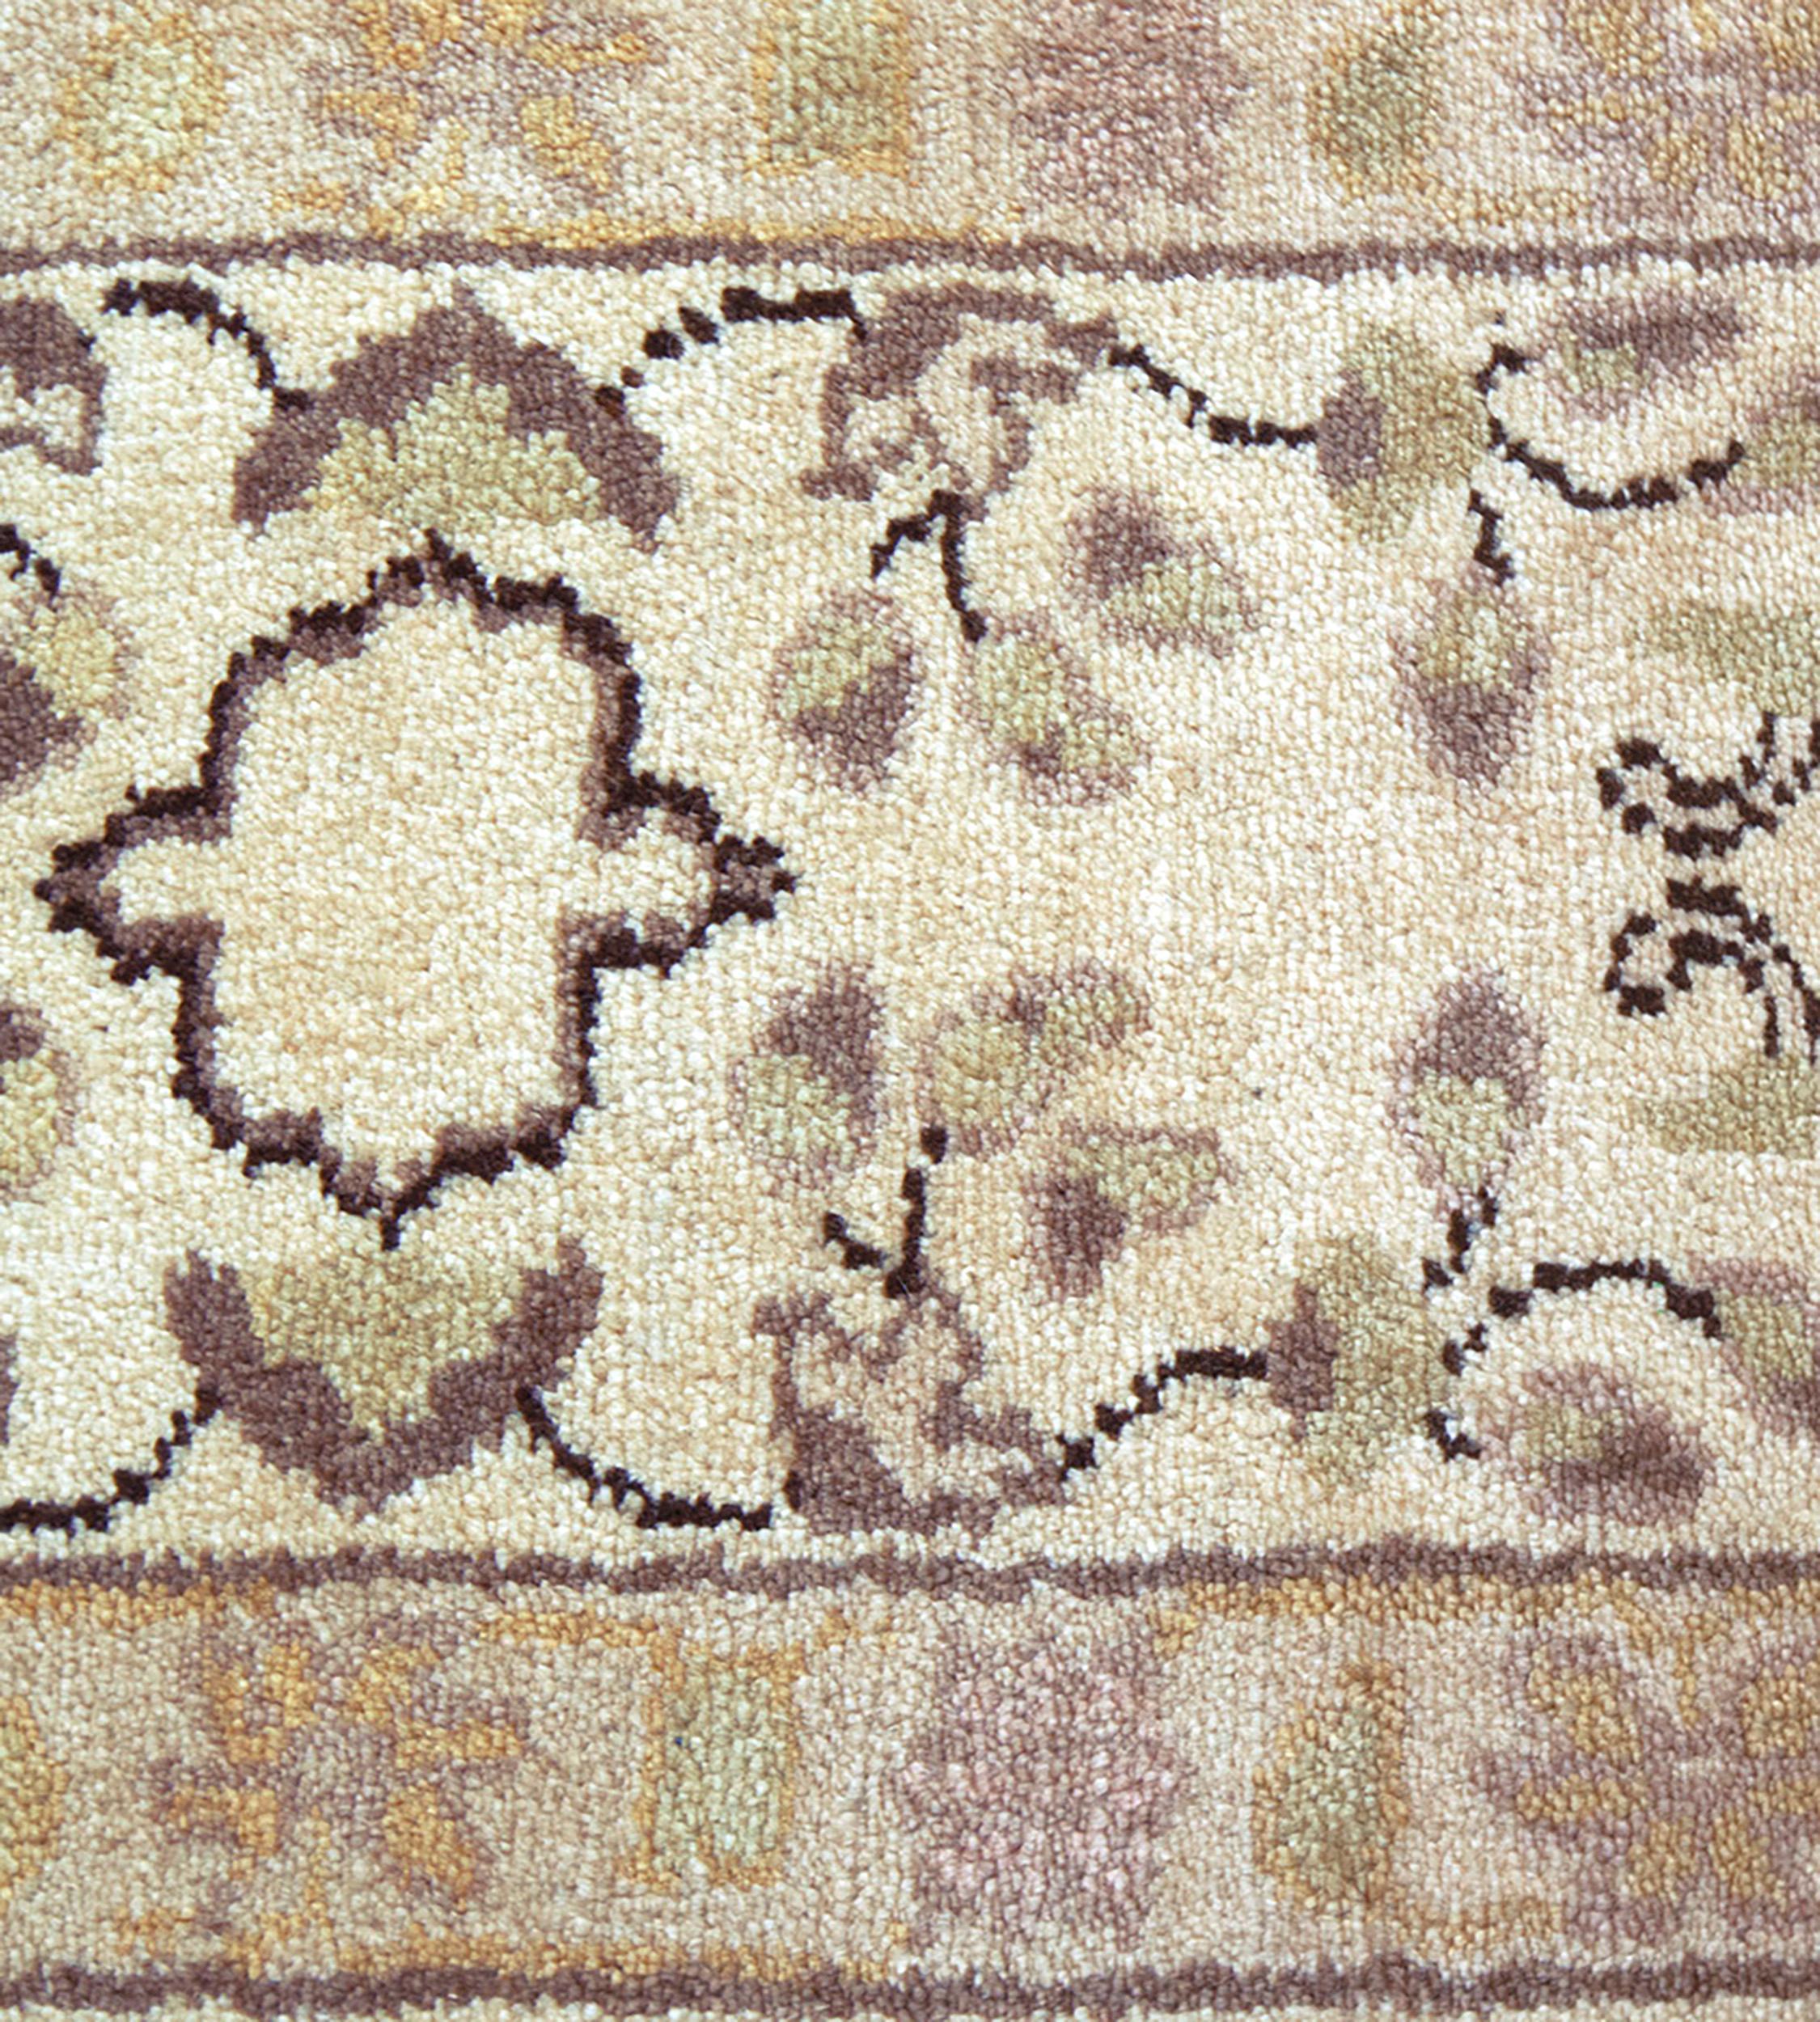 This high quality brand new rug was handwoven in Egypt with superb detailed workmanship and features an Agra-inspired design. 100% natural wool pile.